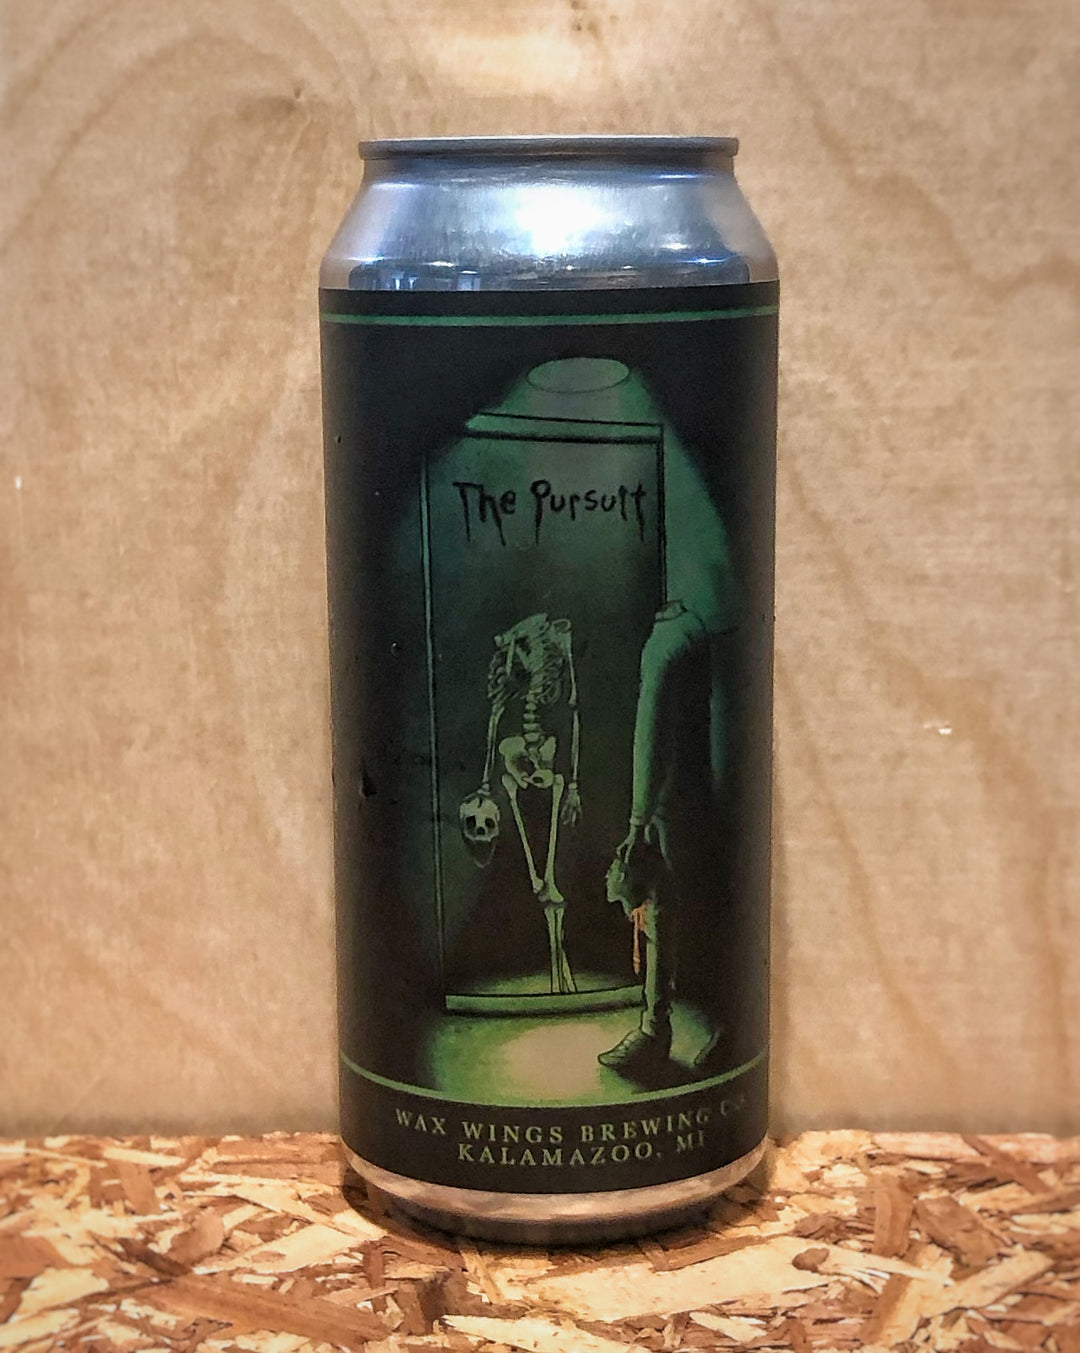 Wax Wings Brewing Co. 'The Pursuit' Double India Pale Ale (Kalamazoo, MI)